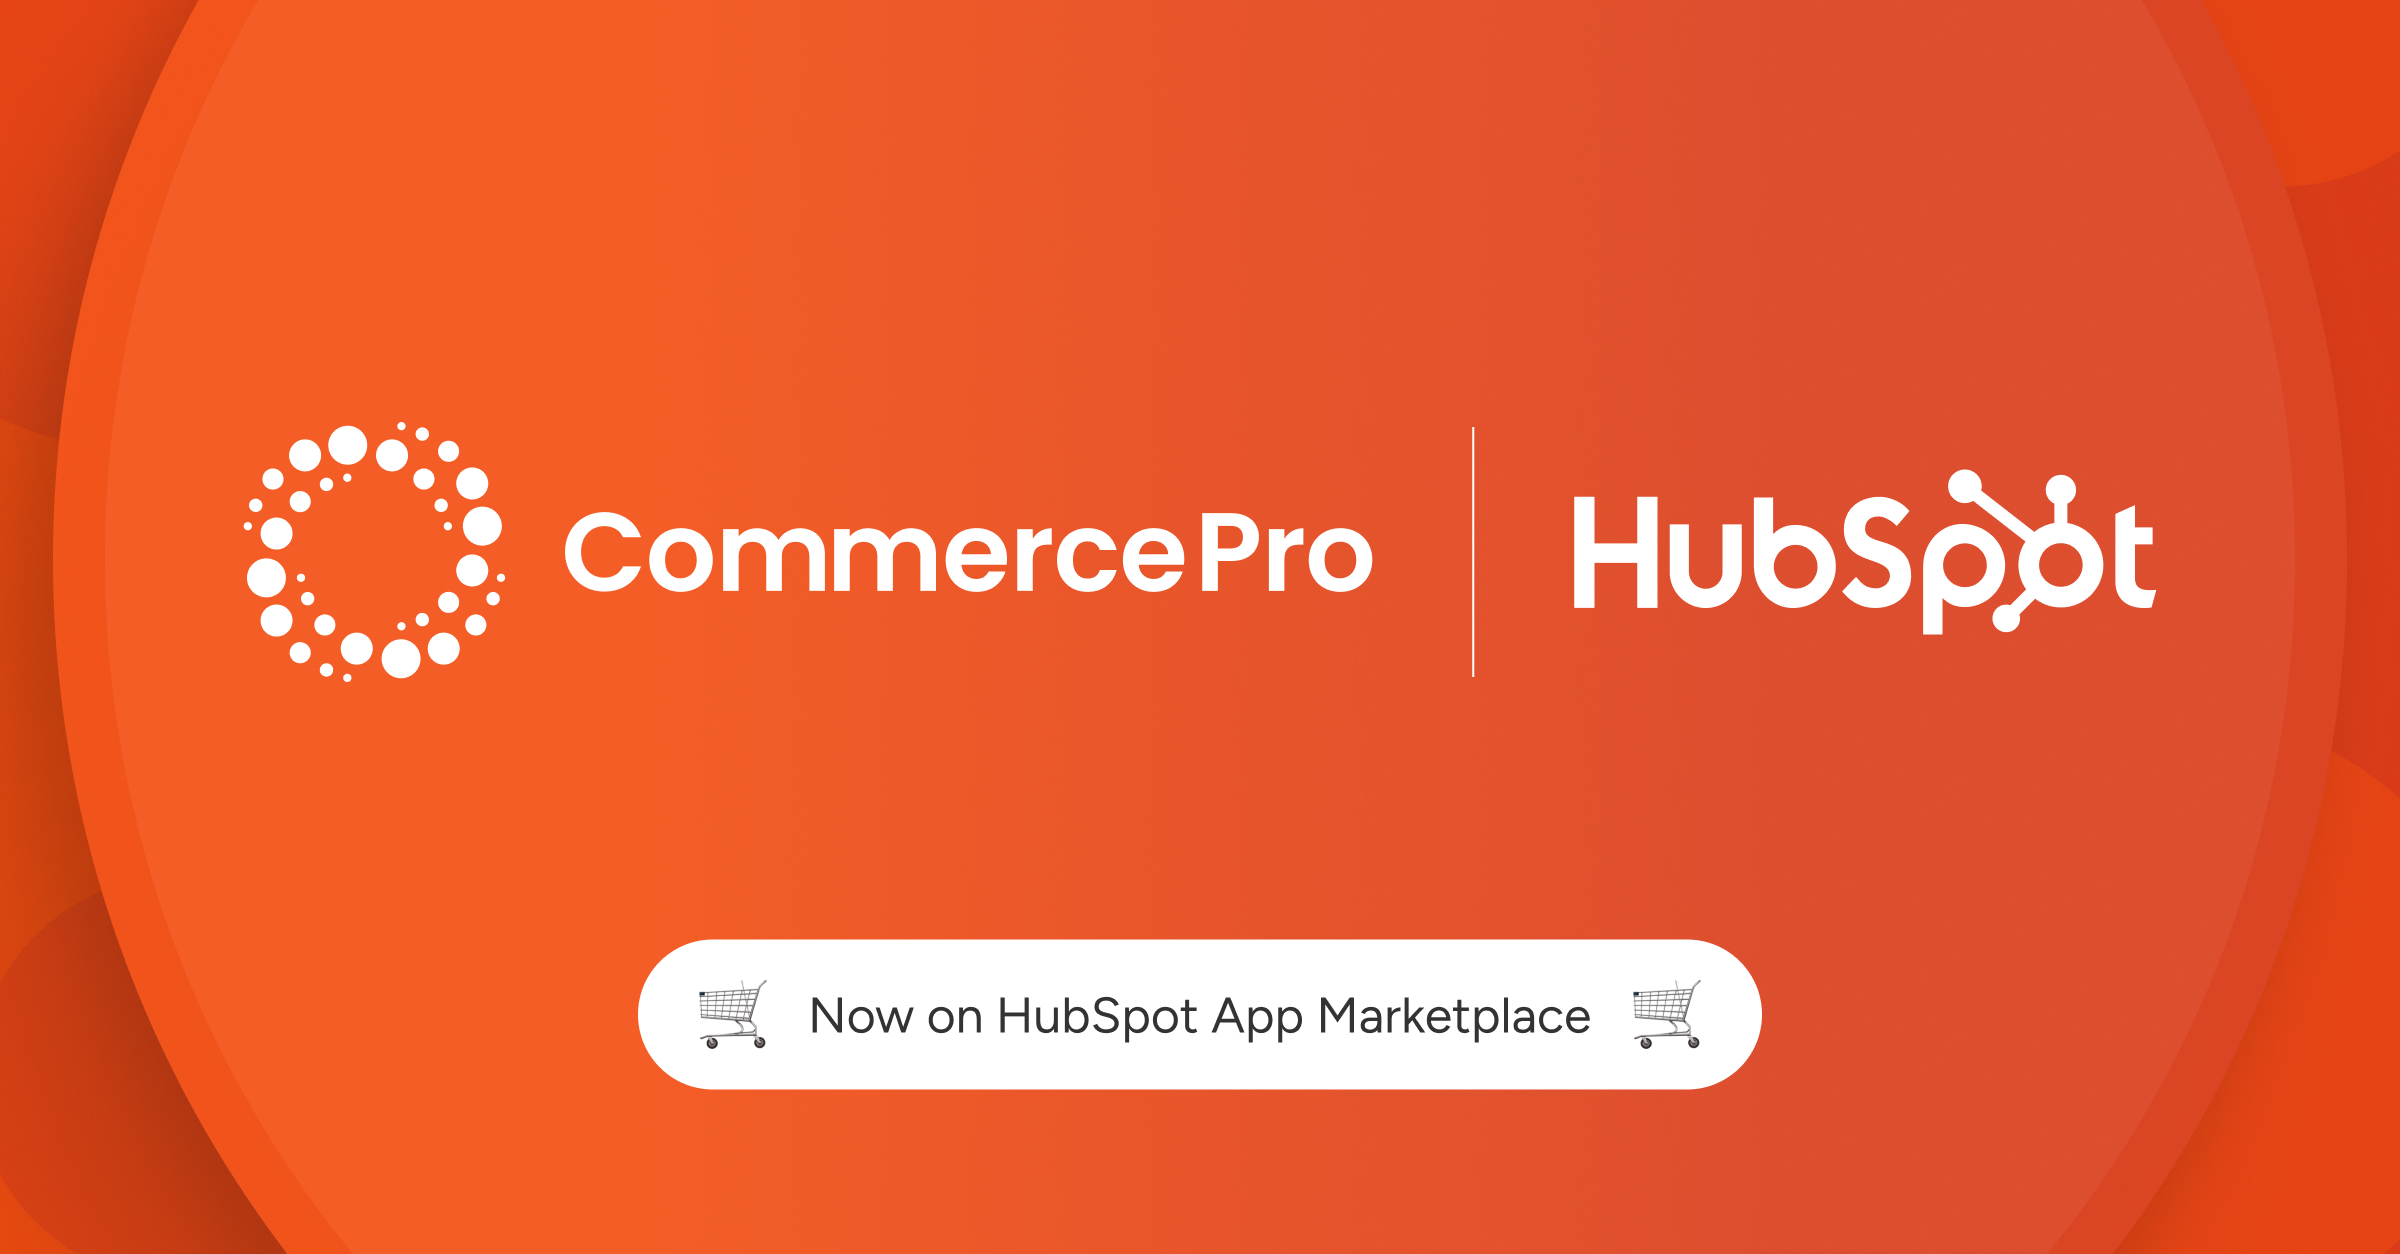 CommercePro officially joins the HubSpot App Marketplace